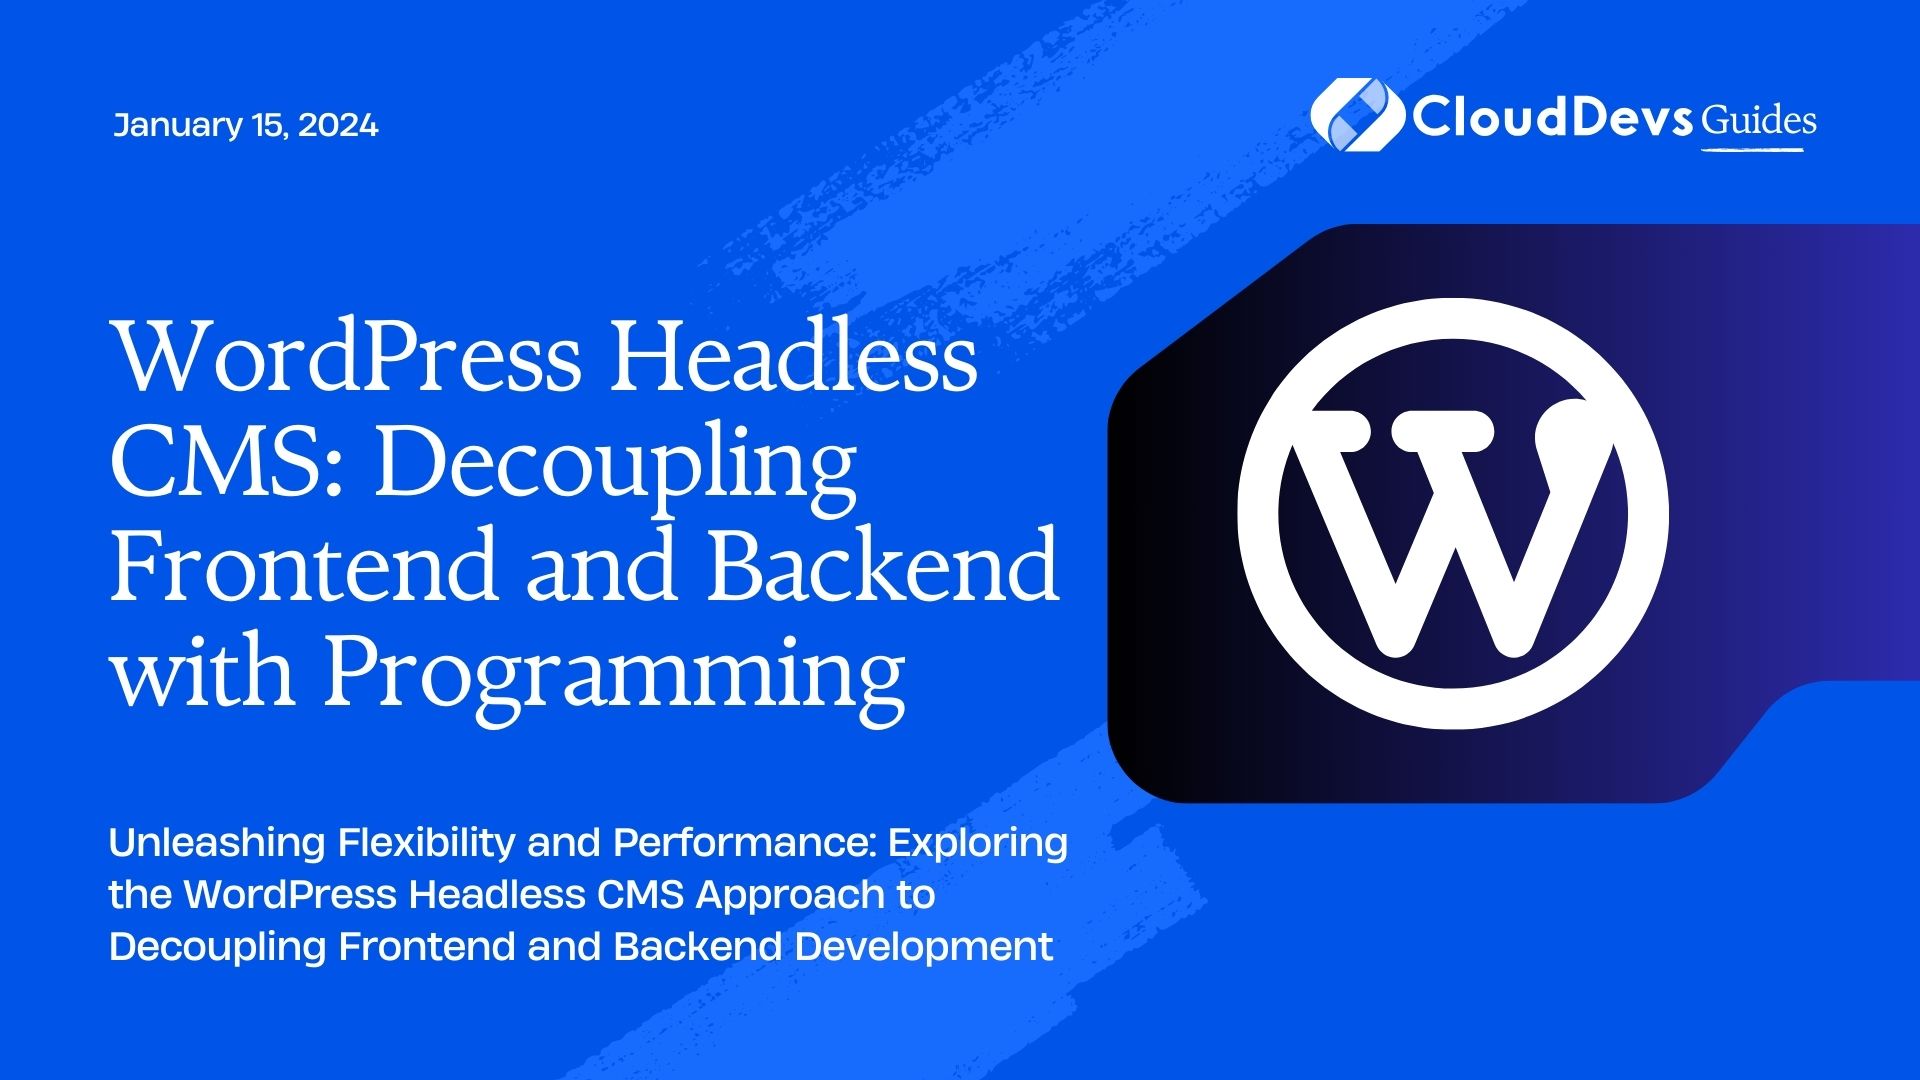 WordPress Headless CMS: Decoupling Frontend and Backend with Programming